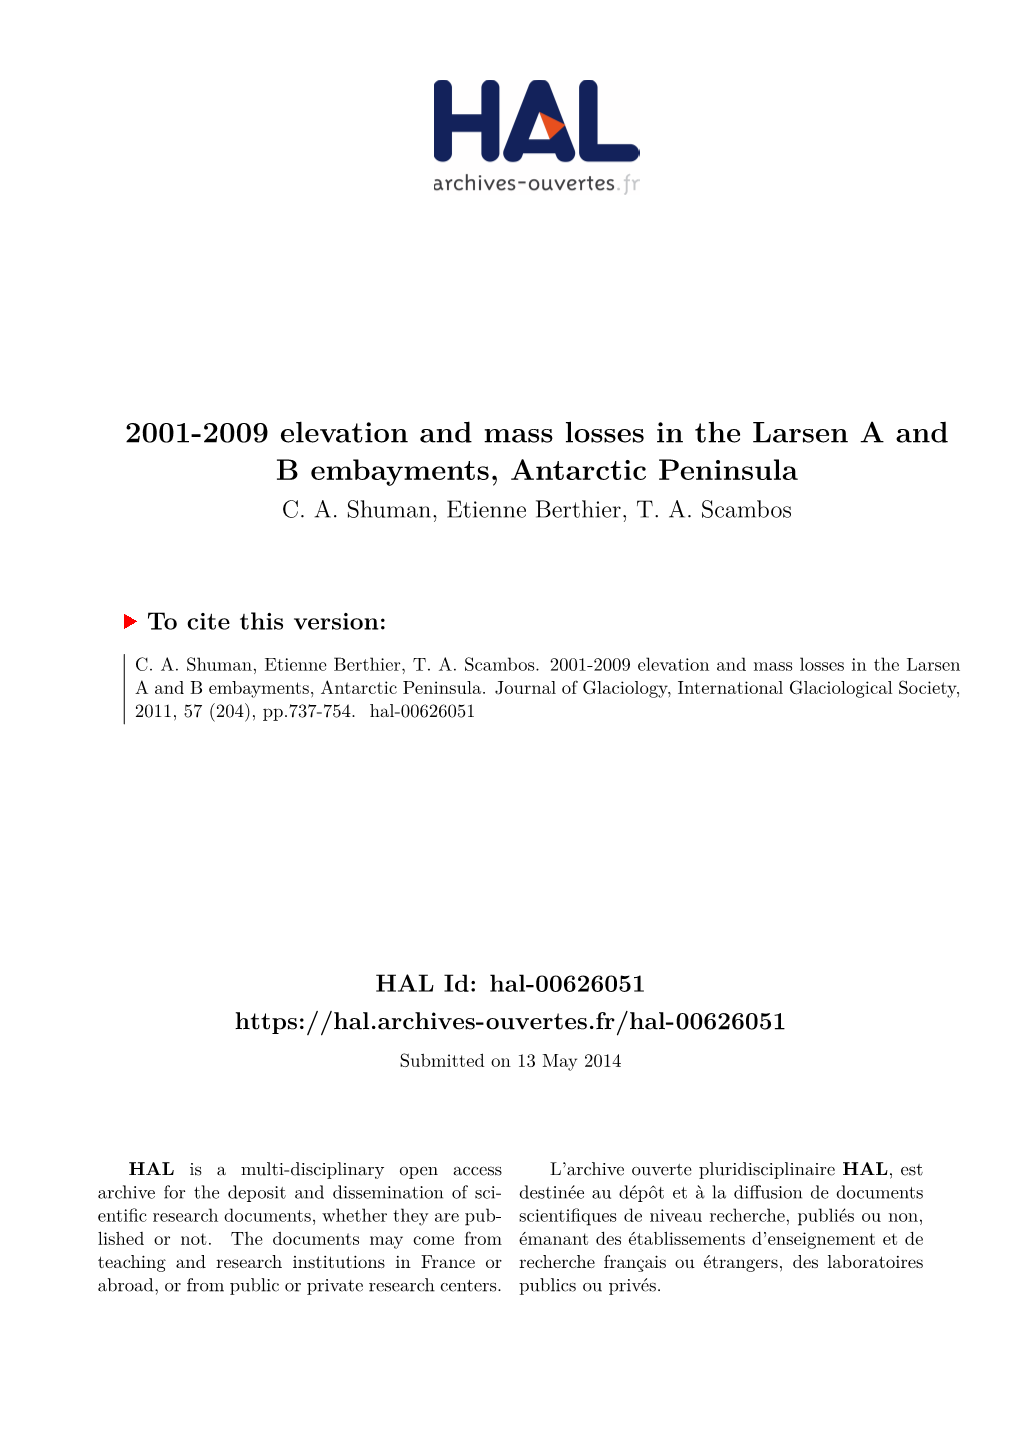 2001-2009 Elevation and Mass Losses in the Larsen a and B Embayments, Antarctic Peninsula C